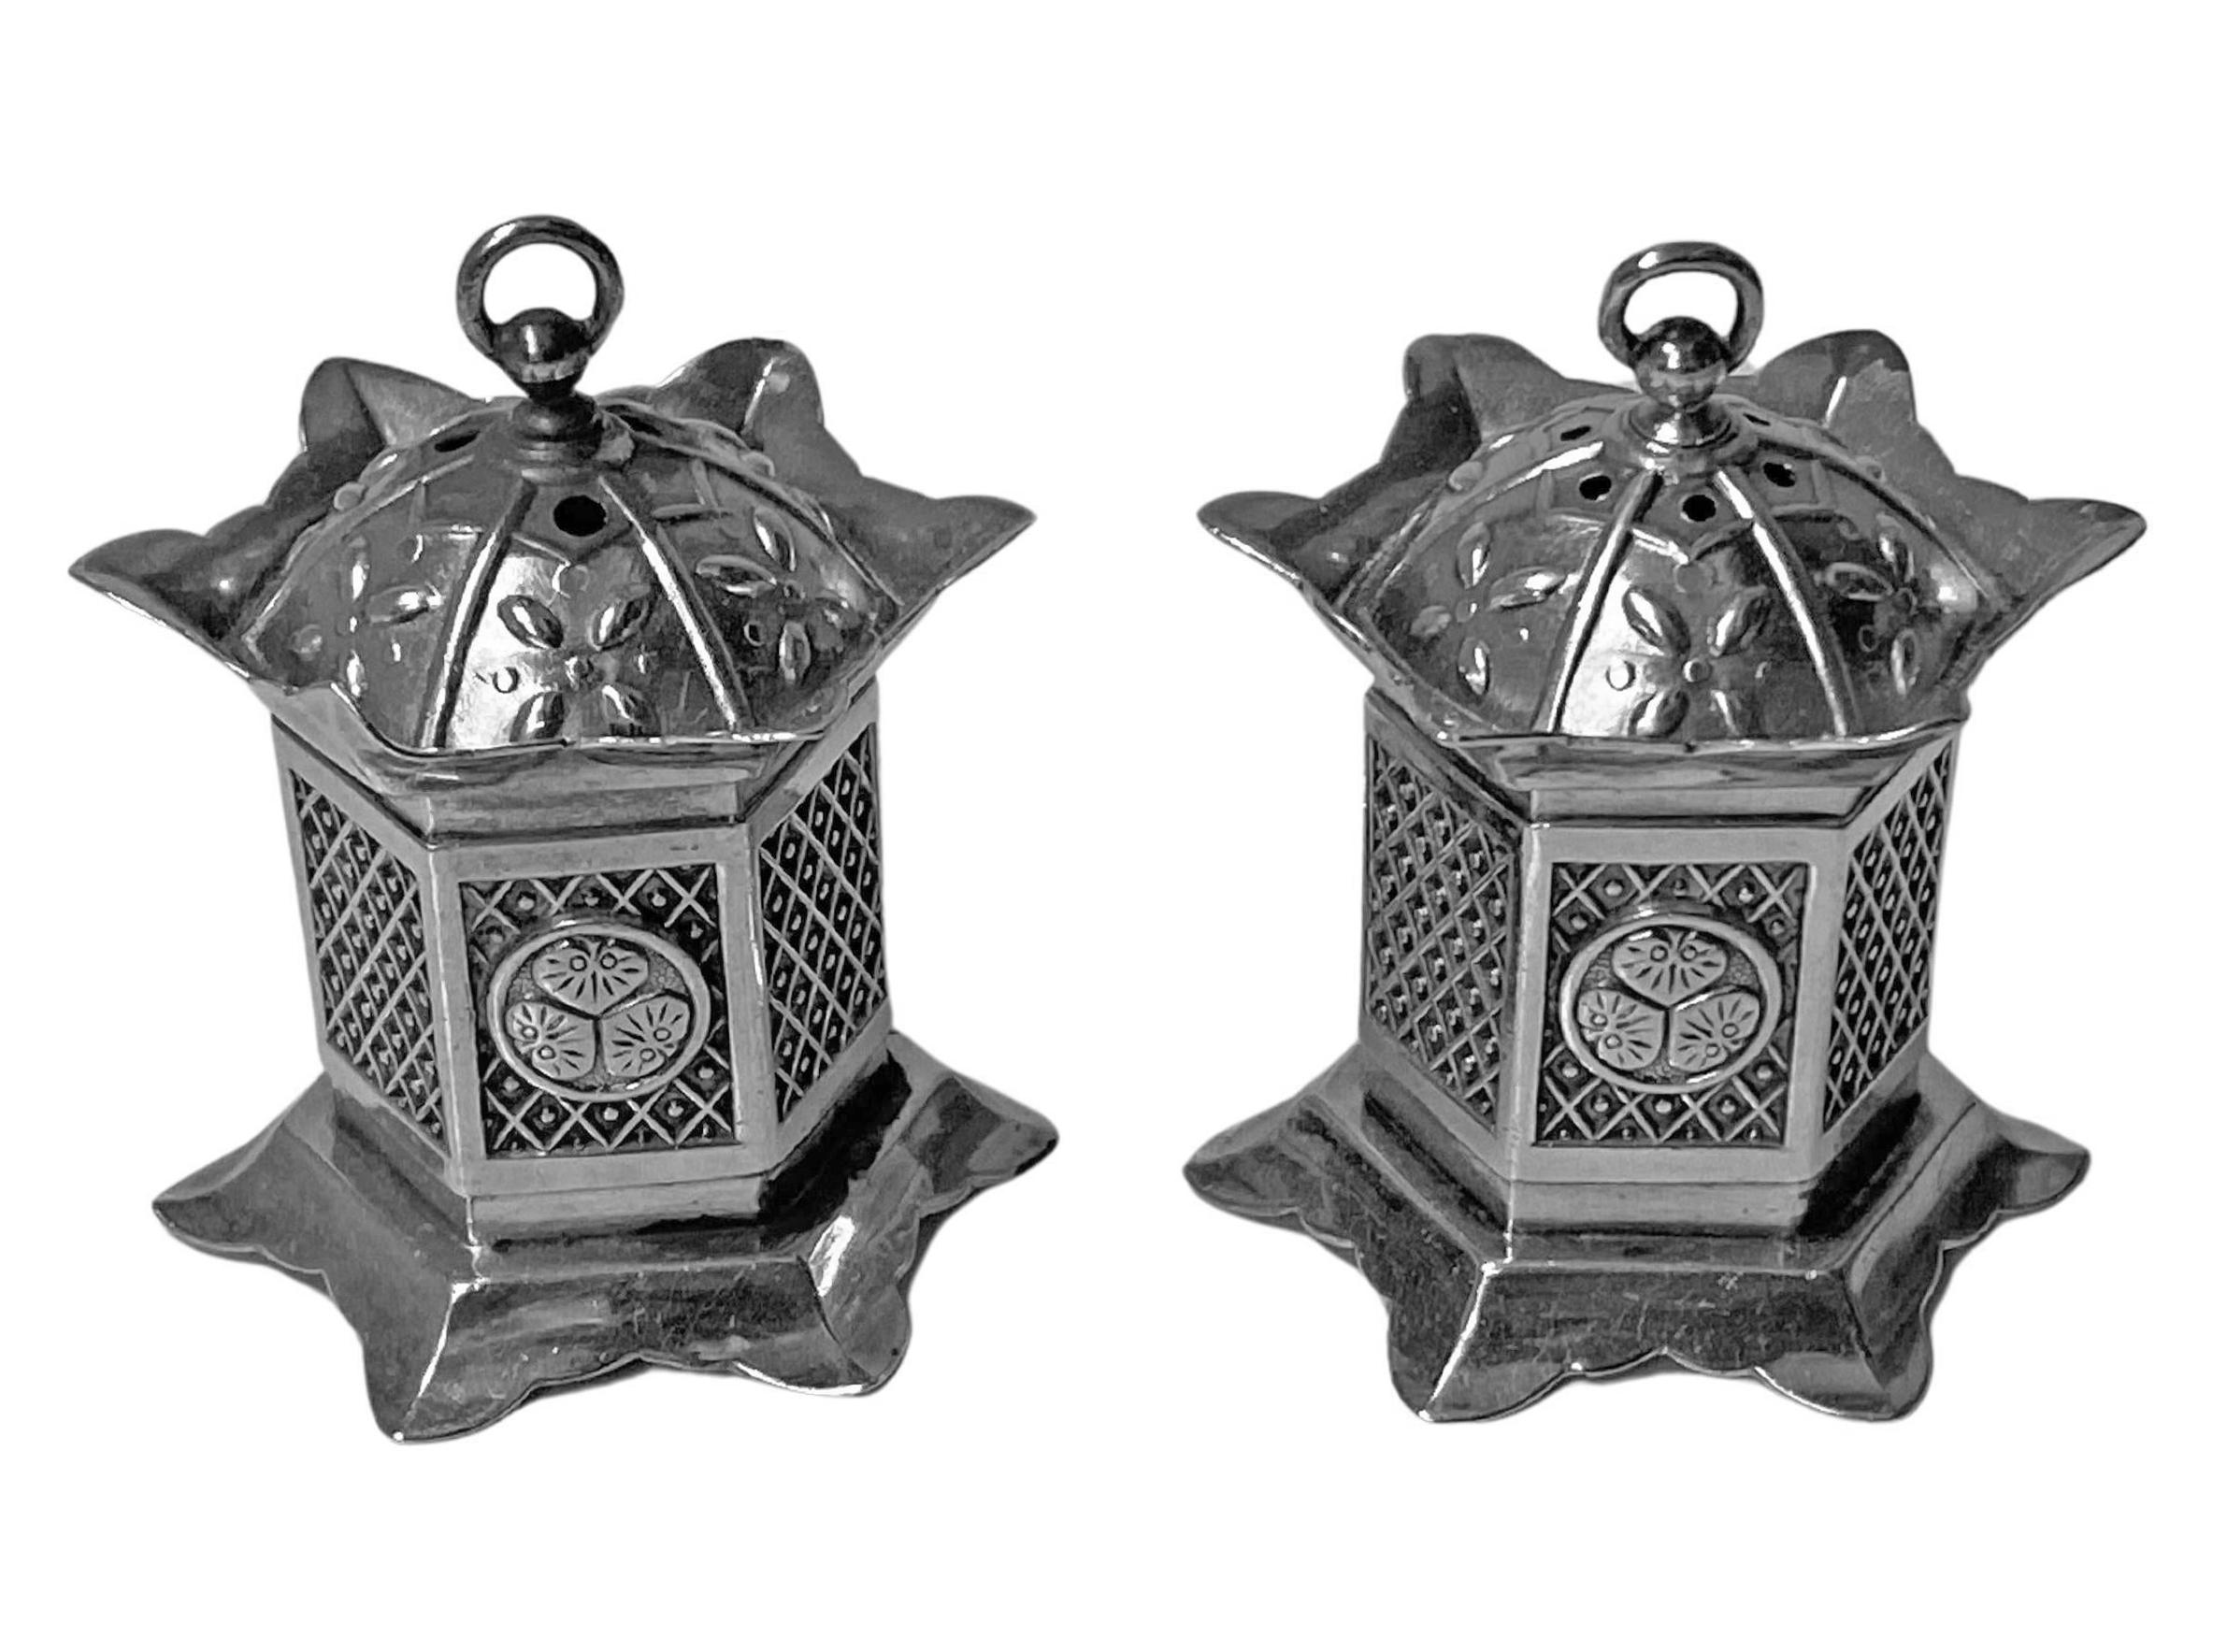 Pair of Asian Silver casters C.1930. Each of hexagonal shape and a surround of panels, some depicting lotus. Dome pierced tops allowing for salt and pepper respectively. The bases have opening slides to fill with salt and pepper. Each stamped